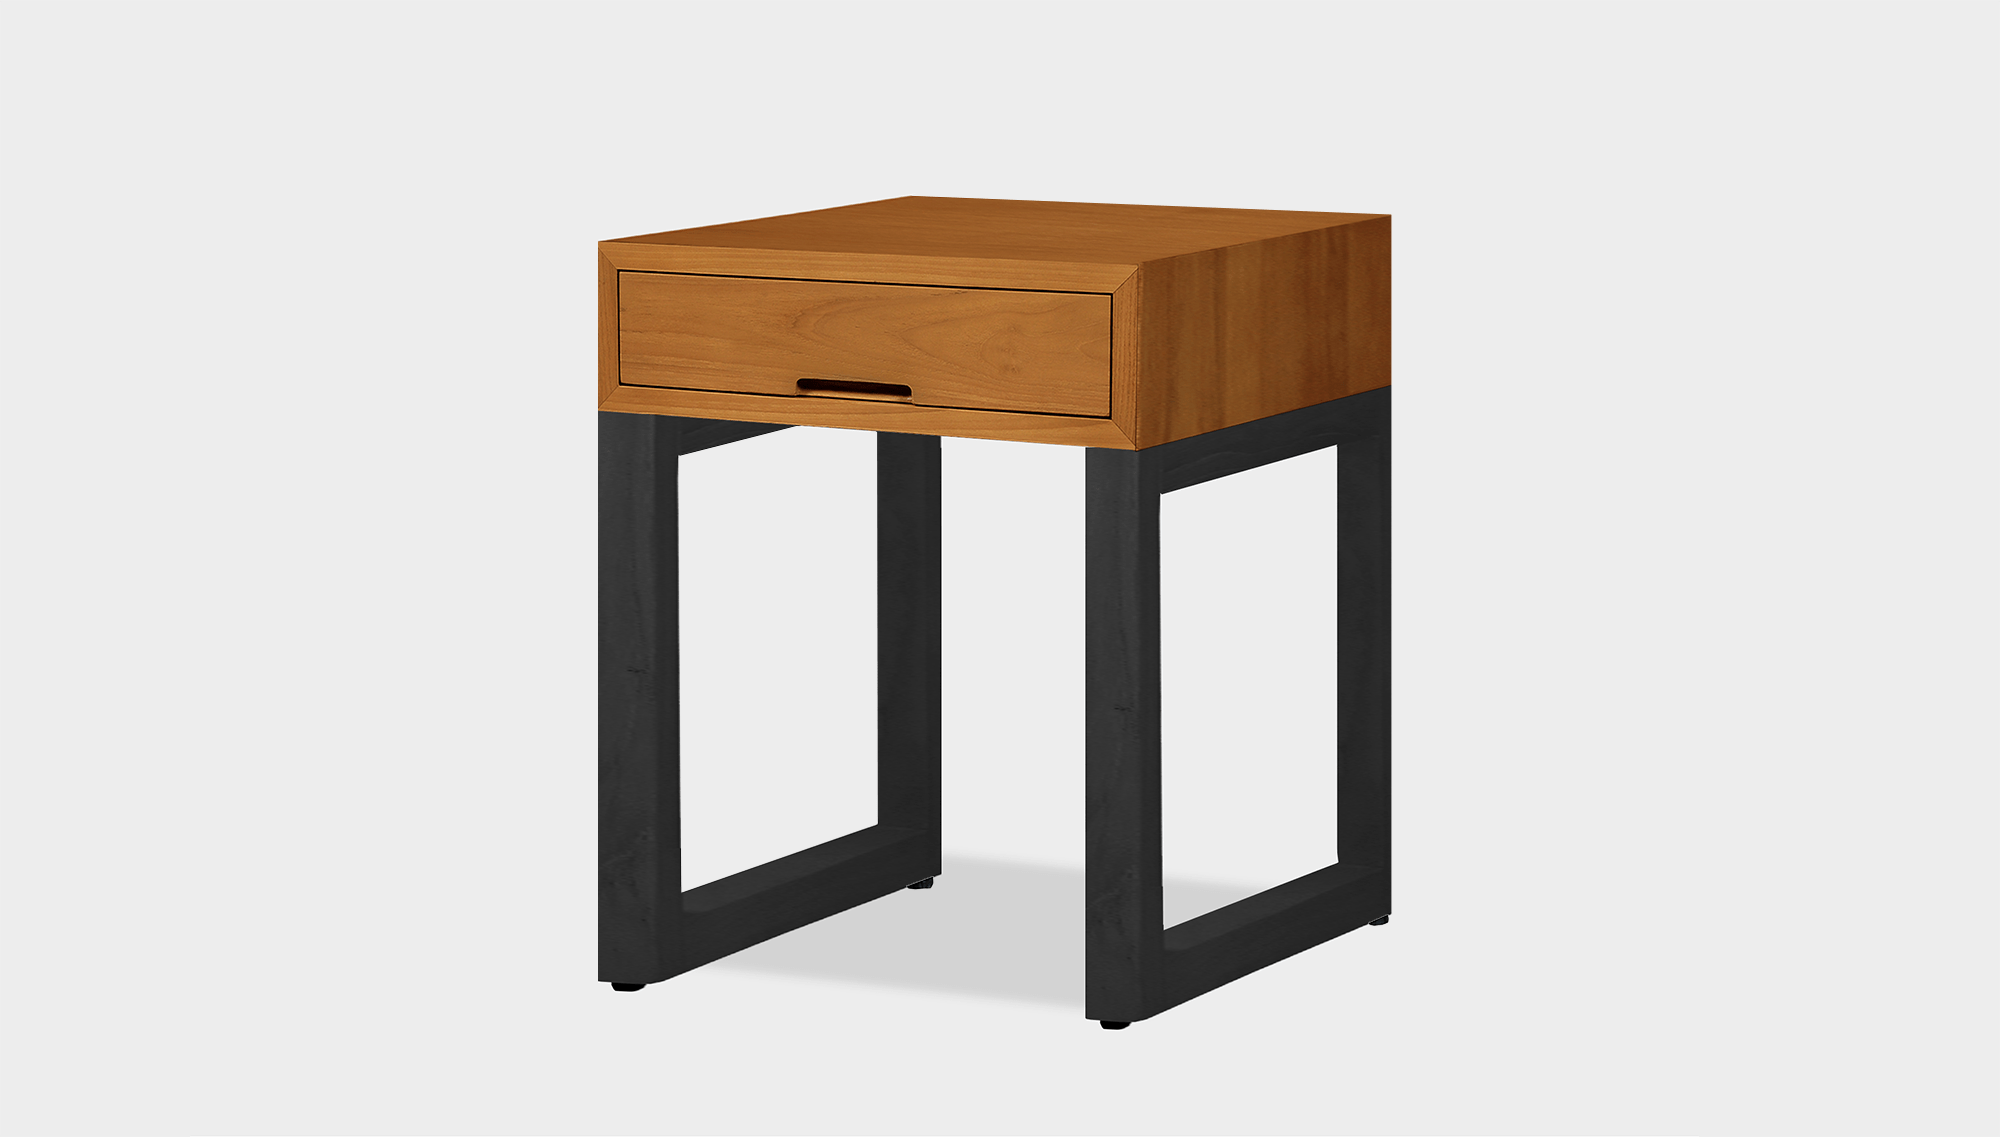 reddie-raw bedside table 45W x 45D x 55H *cm / Wood Teak~Natural / Wood Teak~Black Suzy Bedside Table High Square